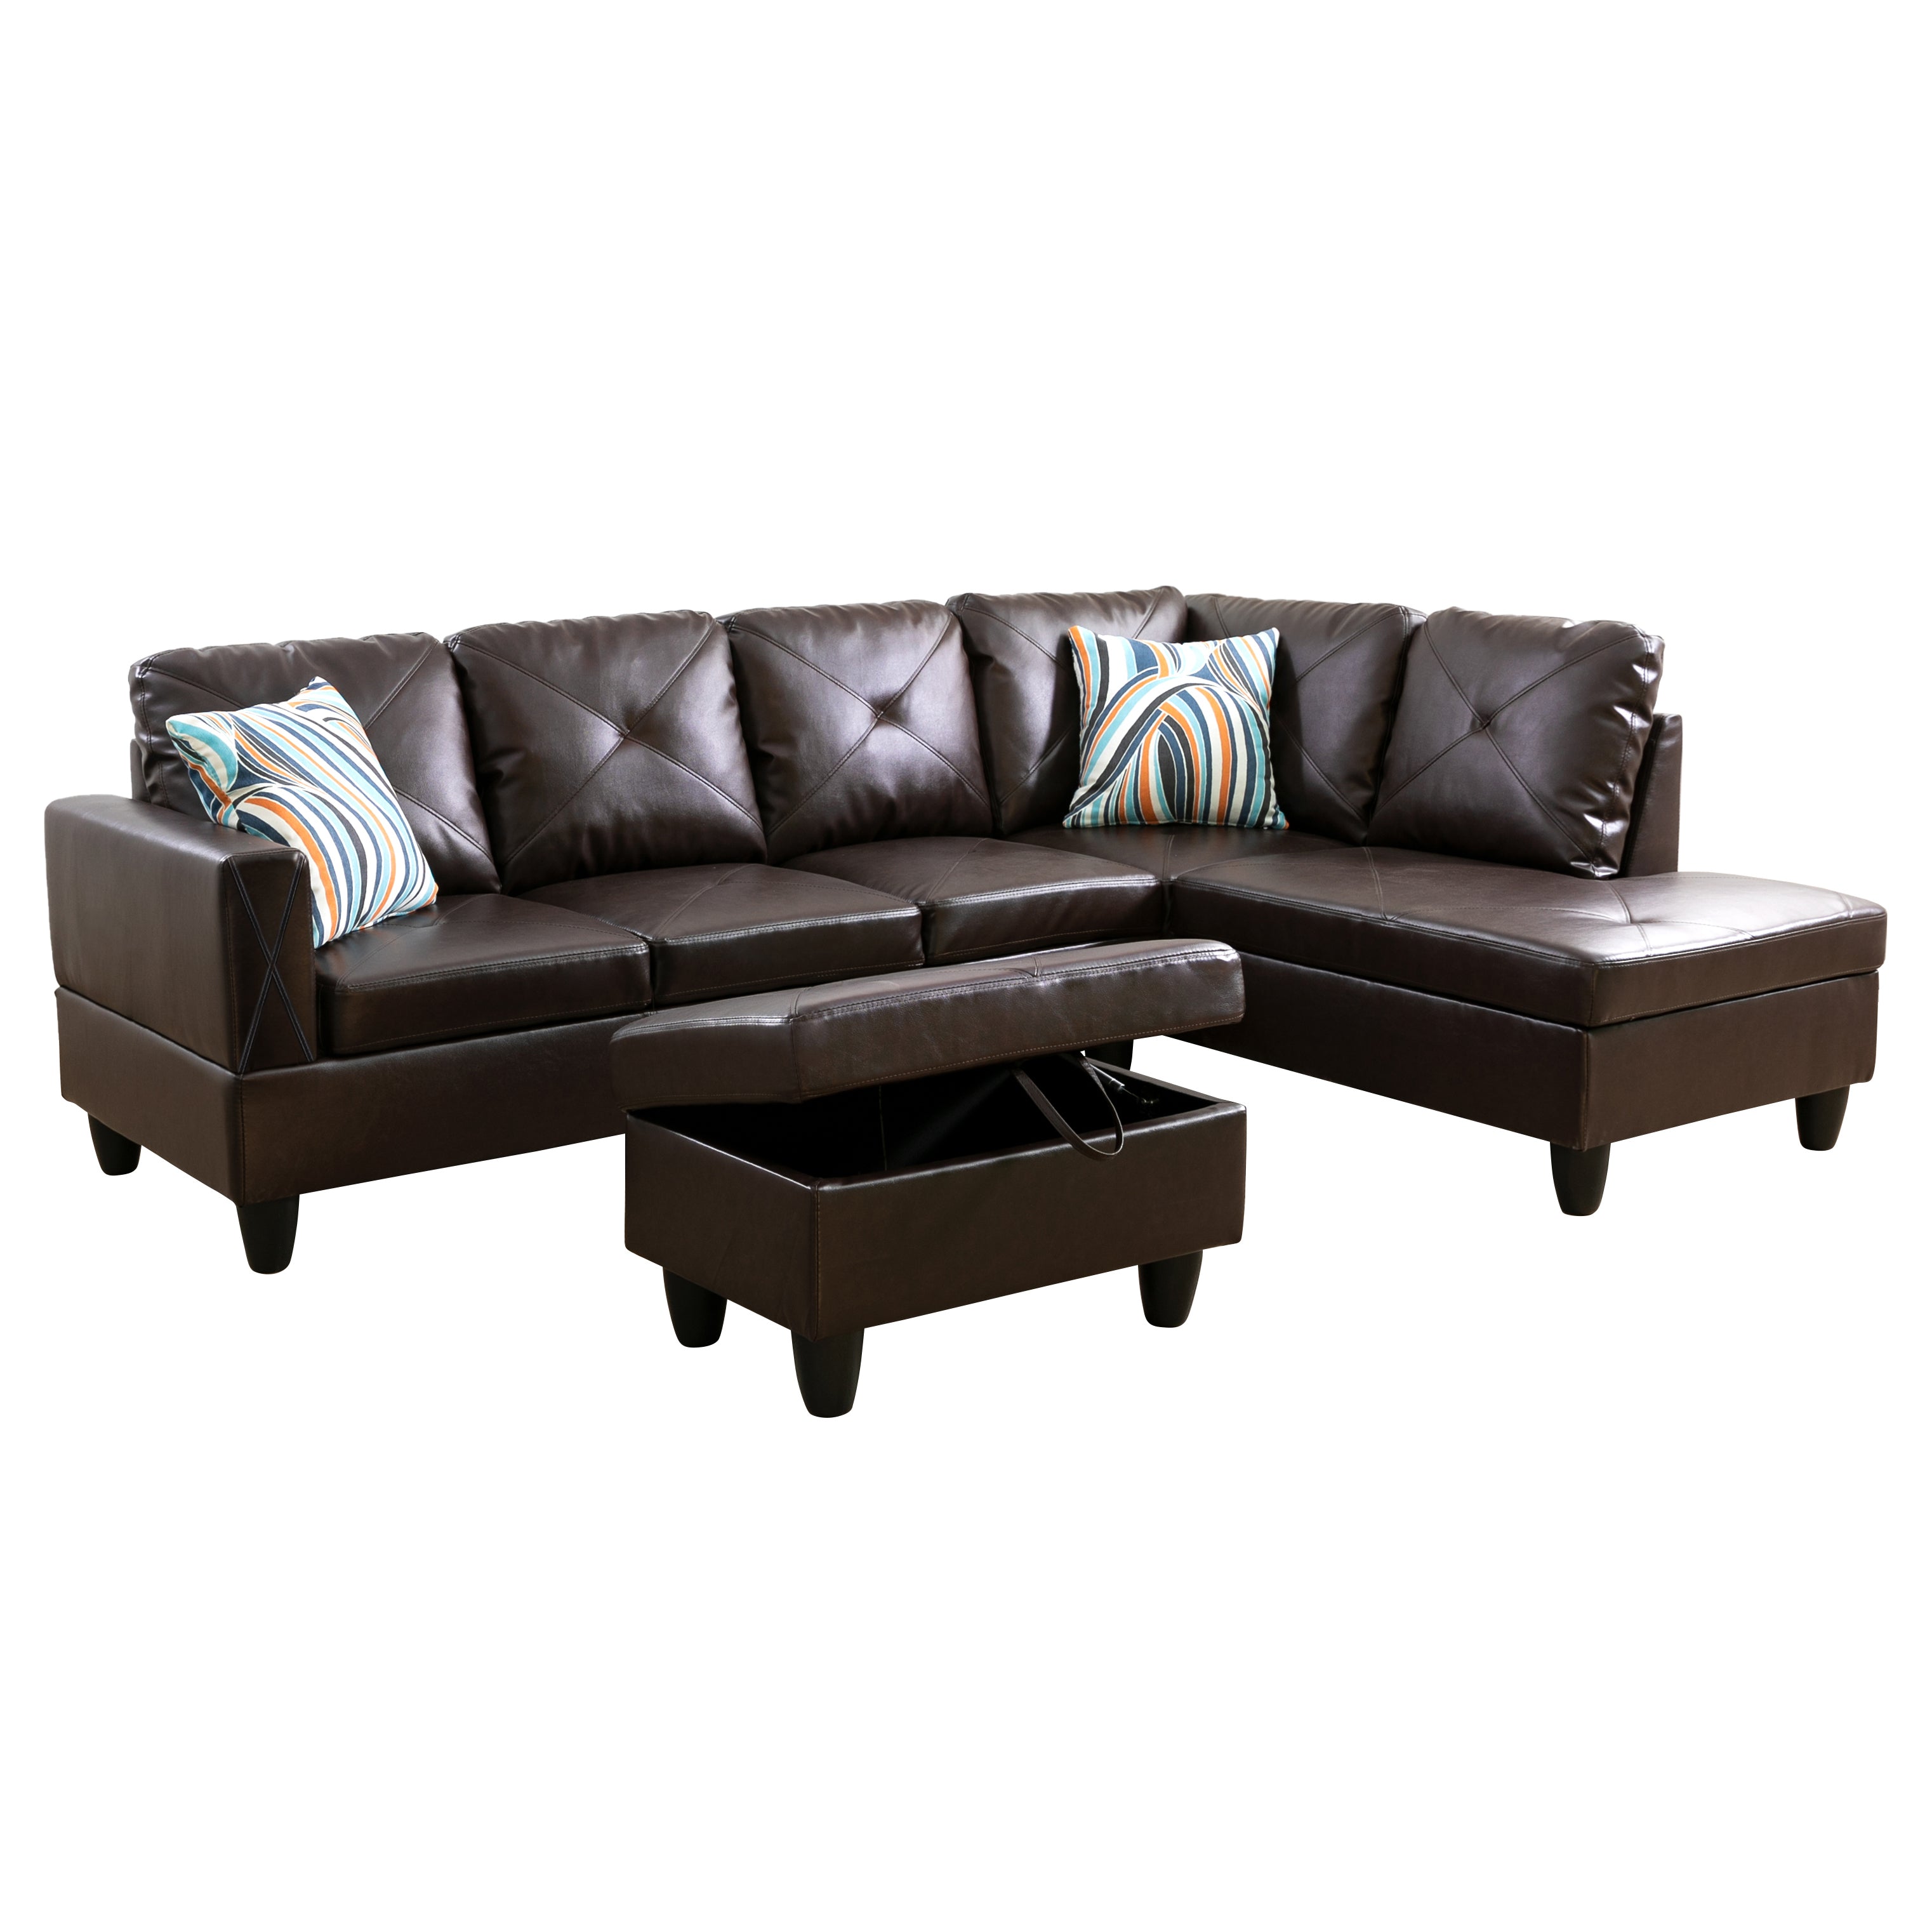 Ainehome Brown L-Shaped Faux Leather Sofa Set